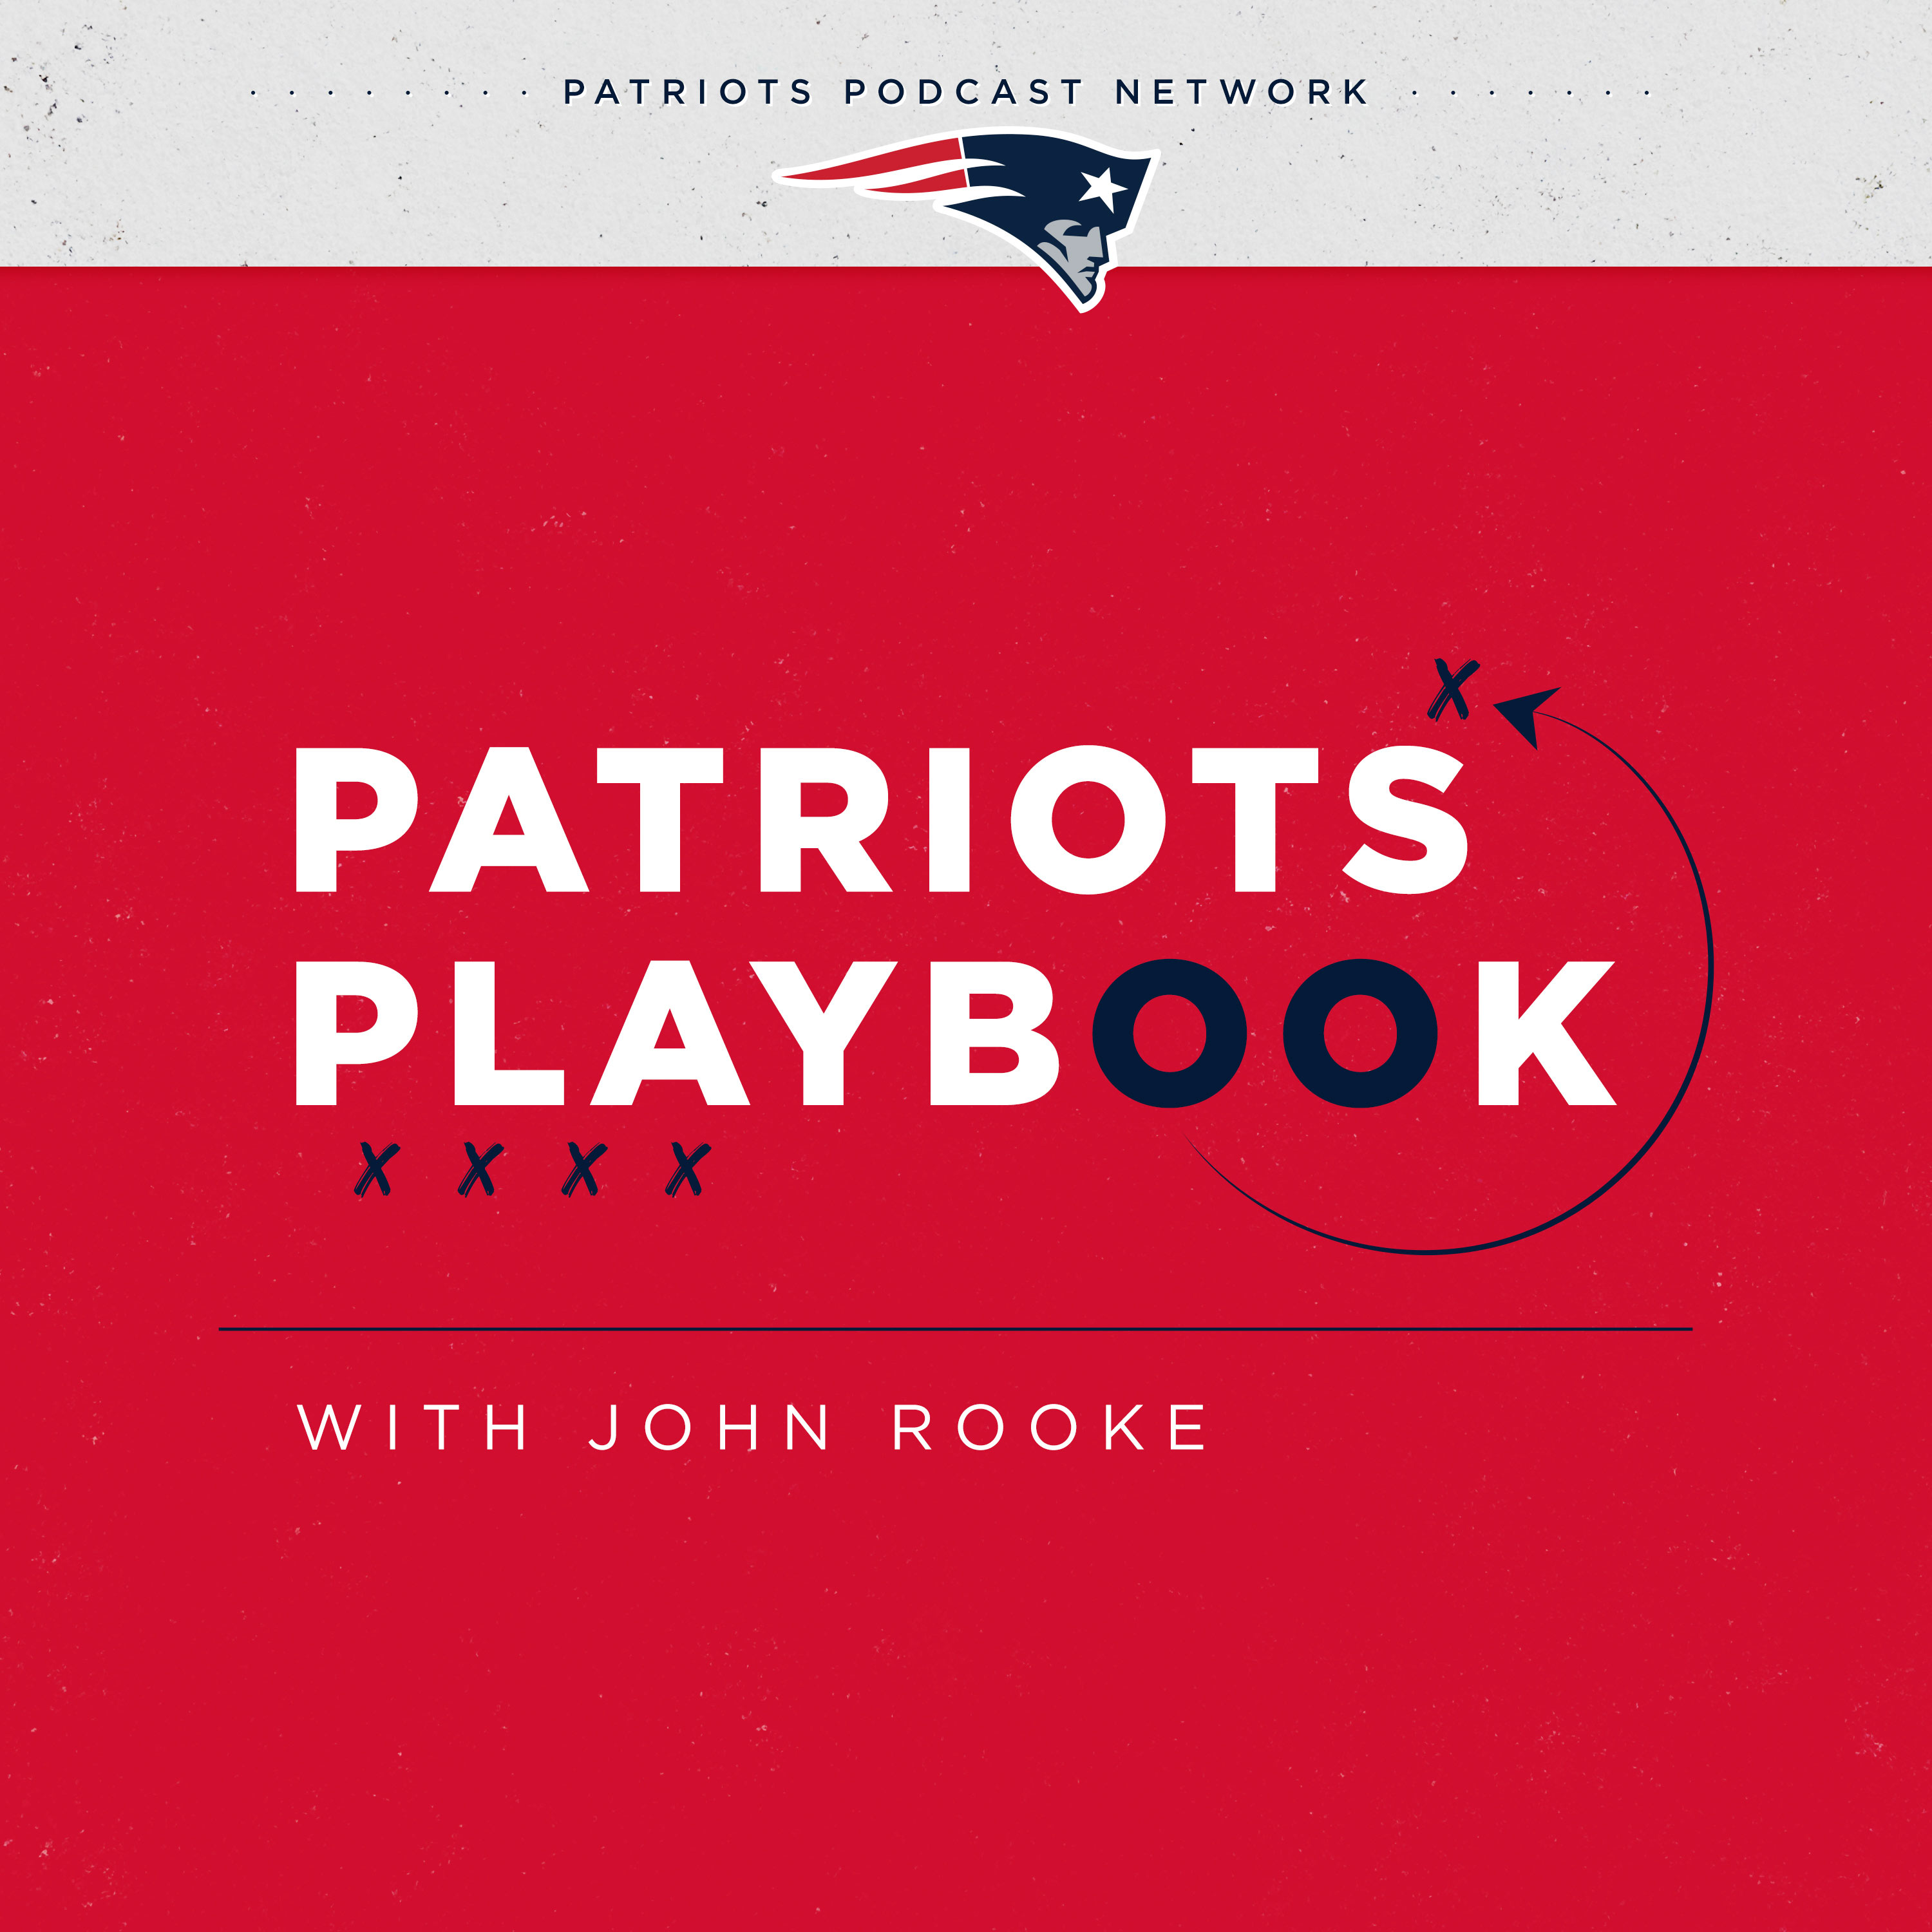 Patriots Playbook 9/8: Previewing the Dolphins and NFL Week 1 Predictions